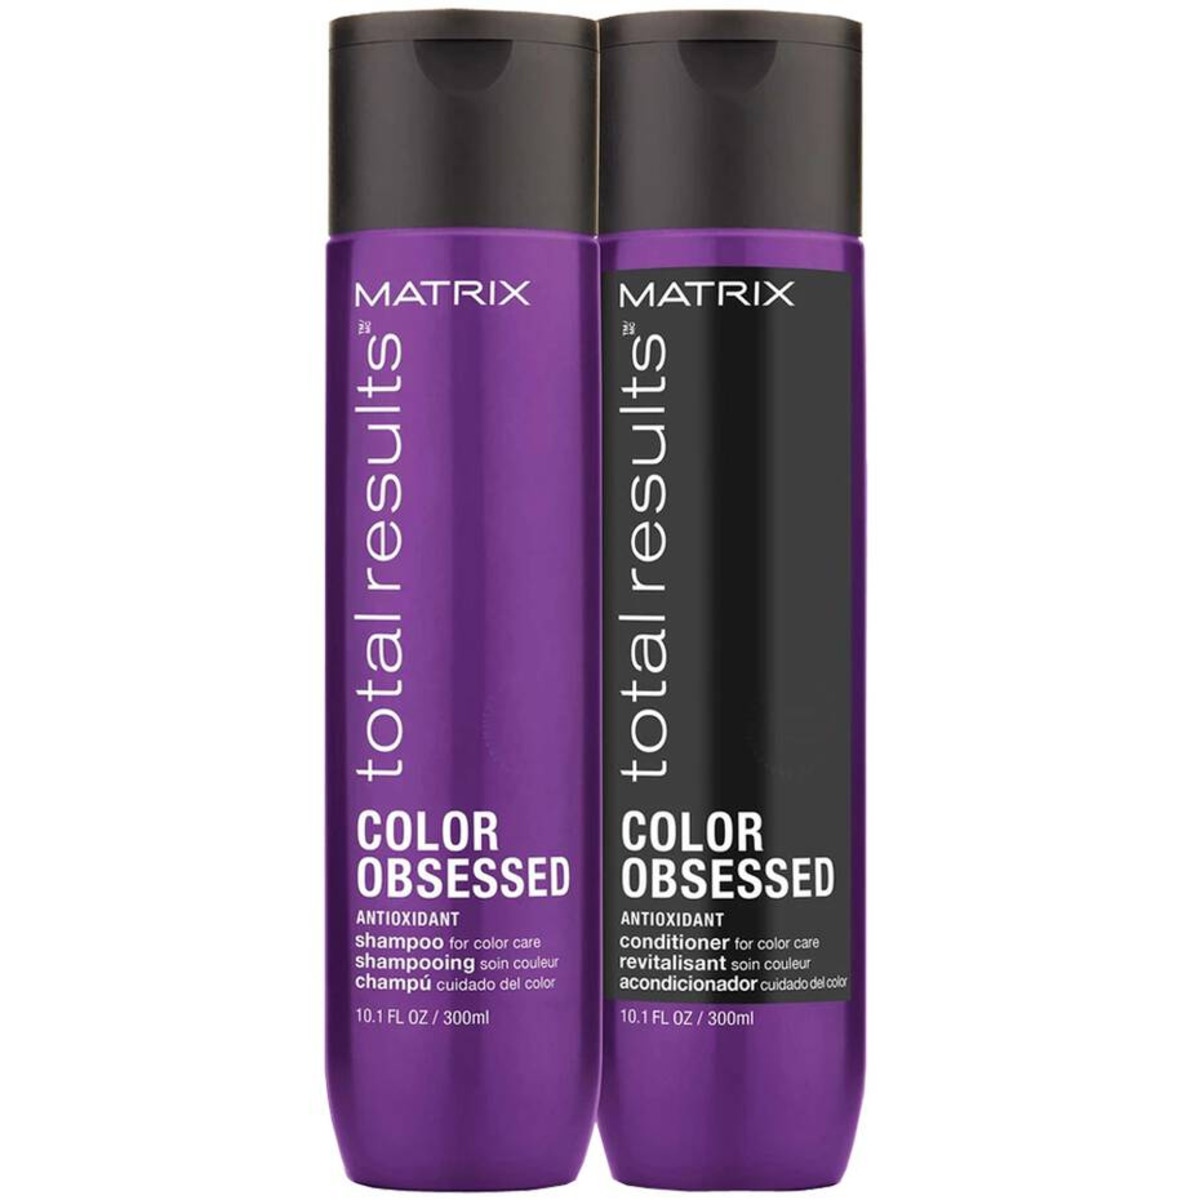 Matrix Total Results Color Obsessed Shampoo and Conditioner (duo, $38.54 $23.12 CAD at lorealbeautyoutlet.ca*)